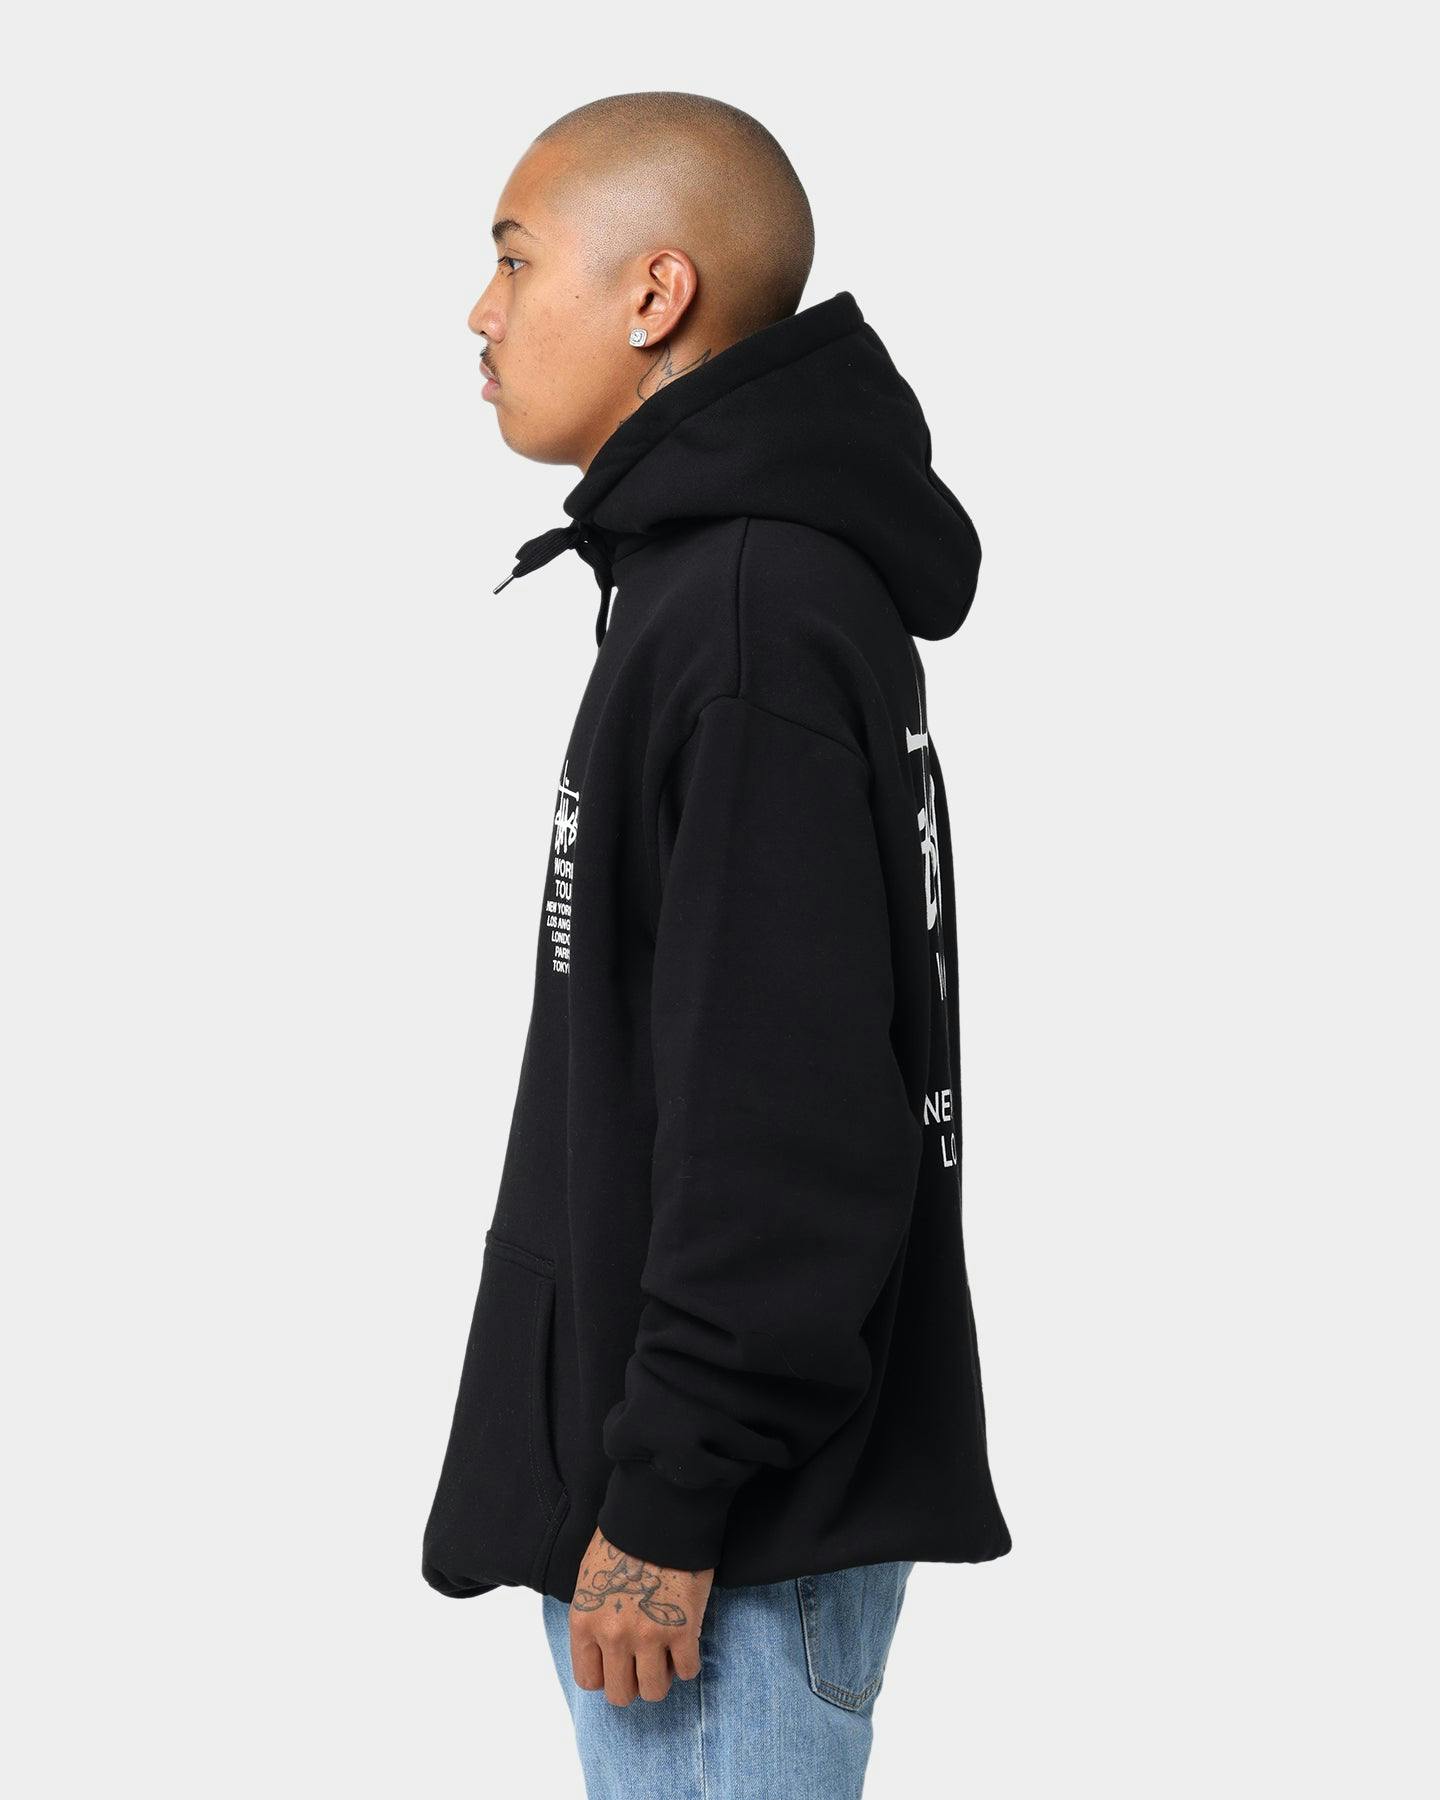 Stussy World Tour Hoodie Solid Black | Culture Kings